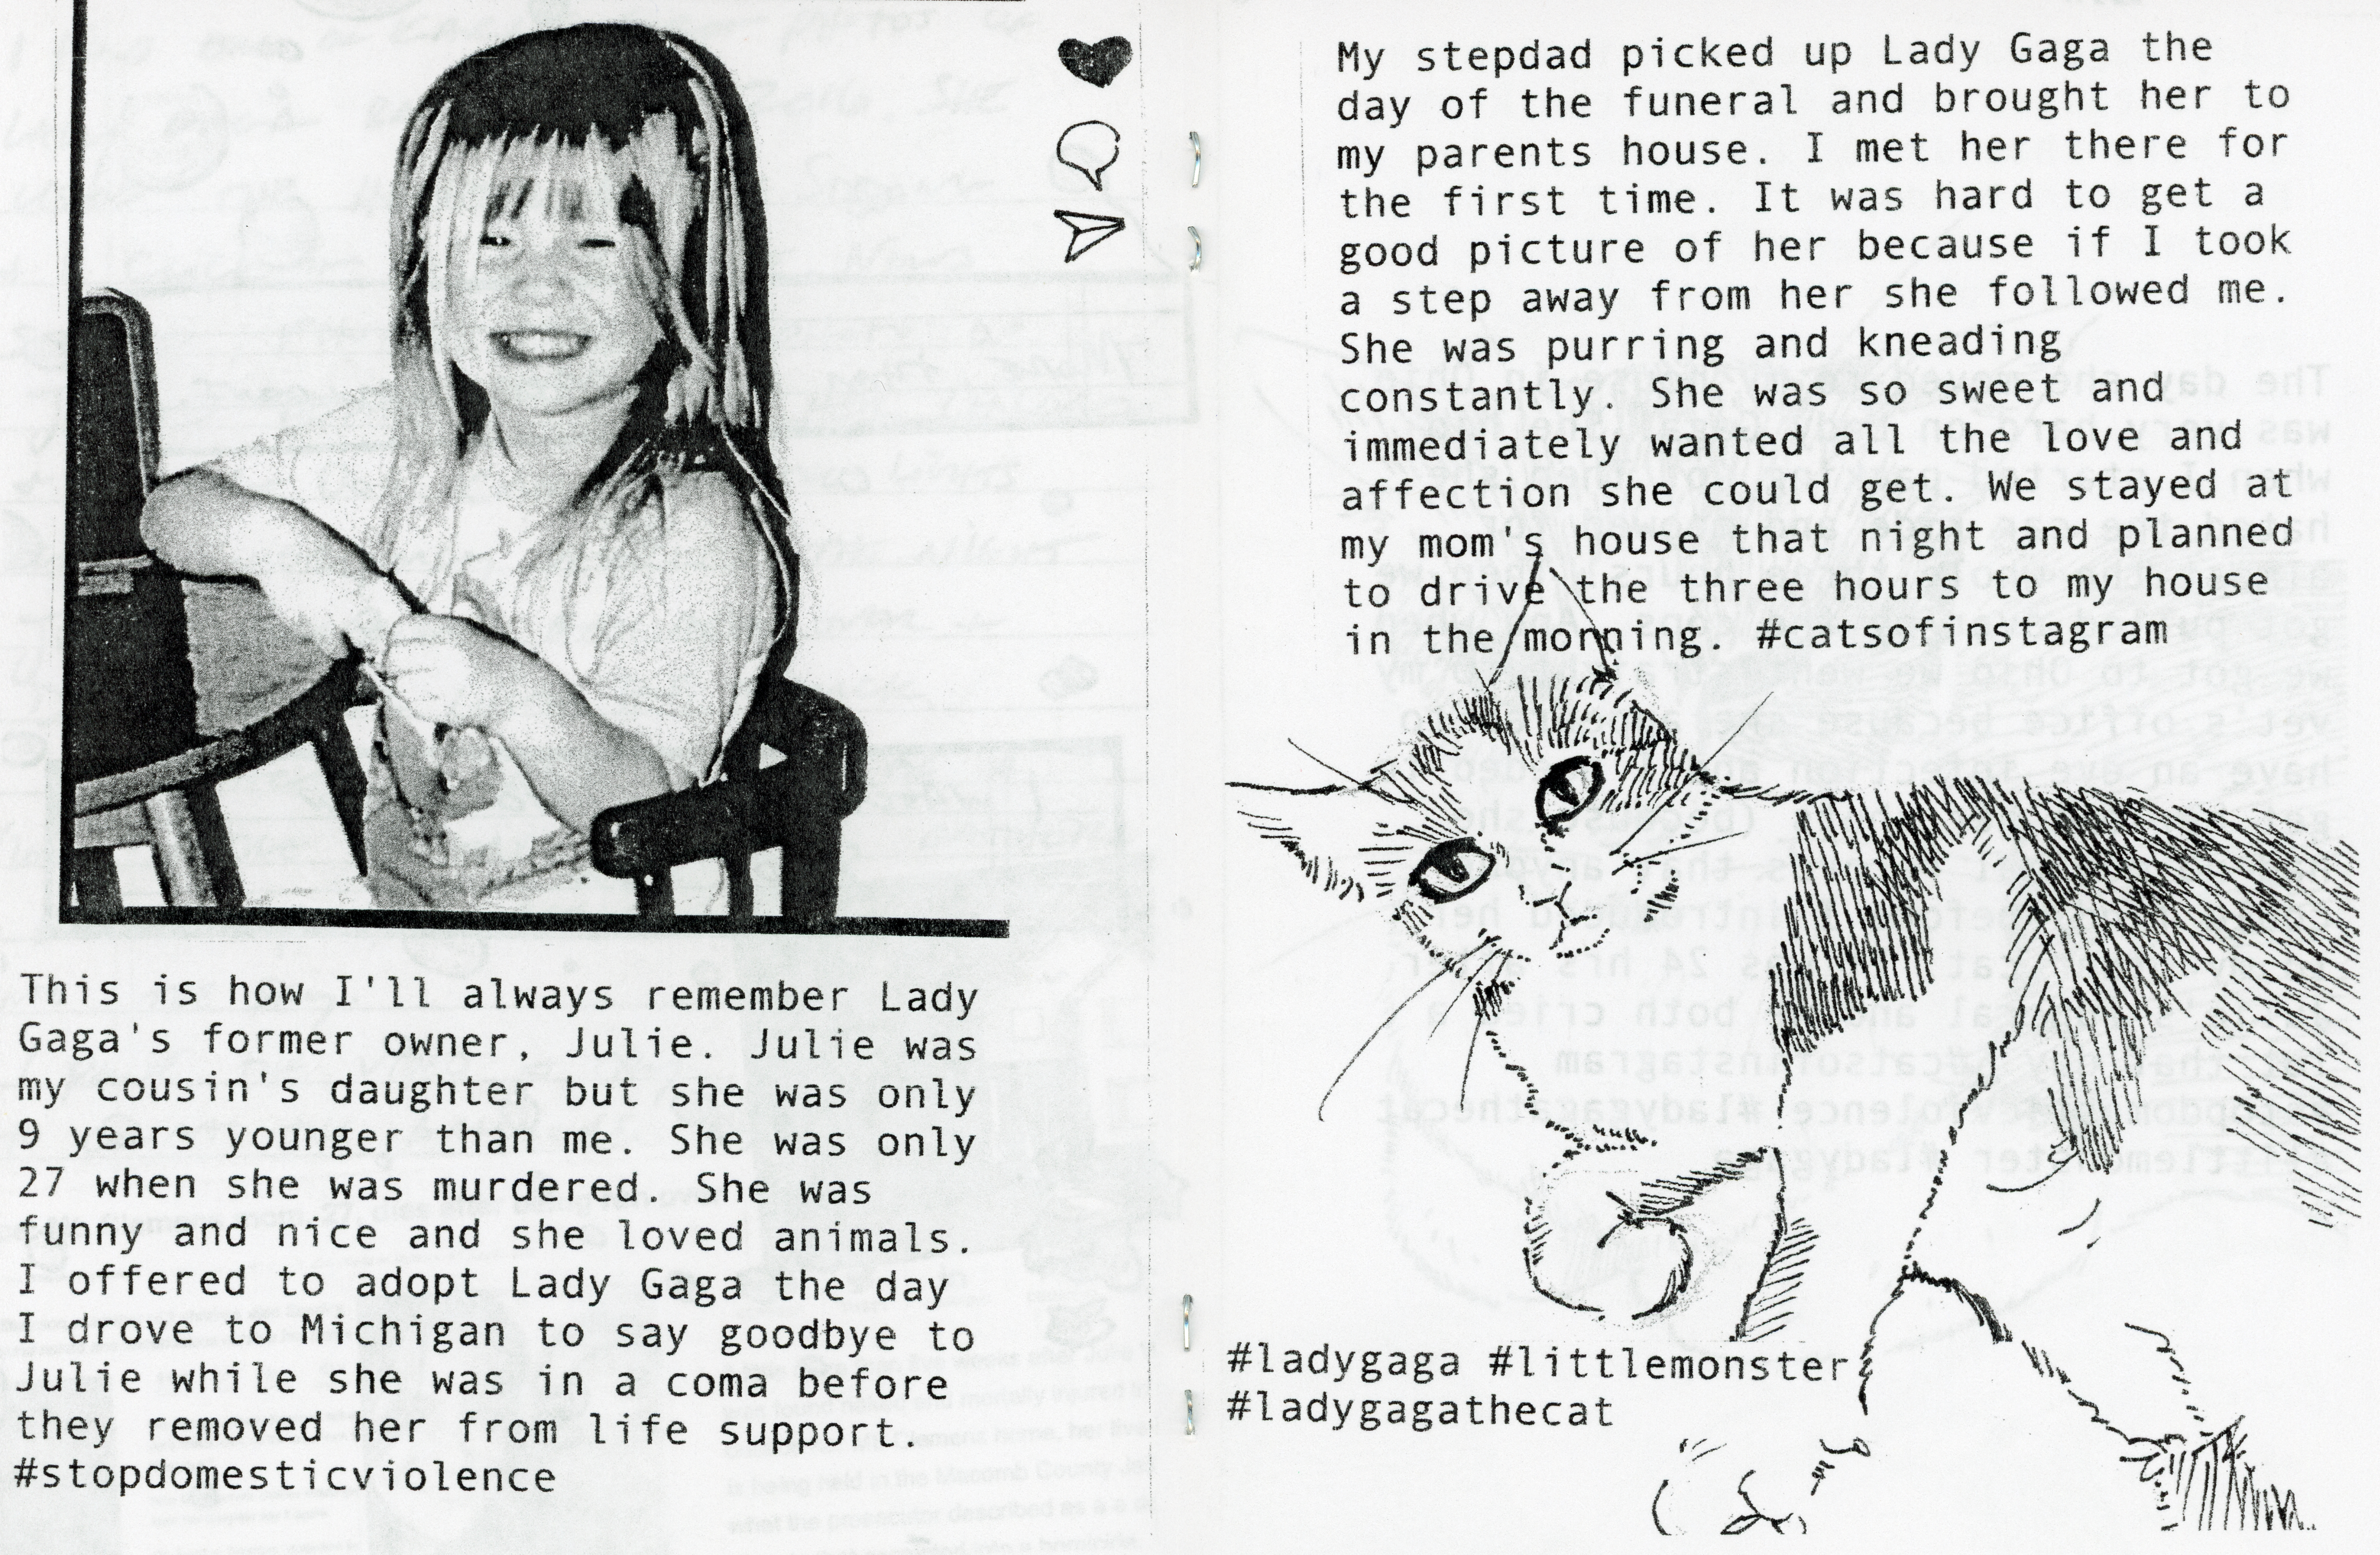 Childhood image of Julie and more of the story of getting Gaga